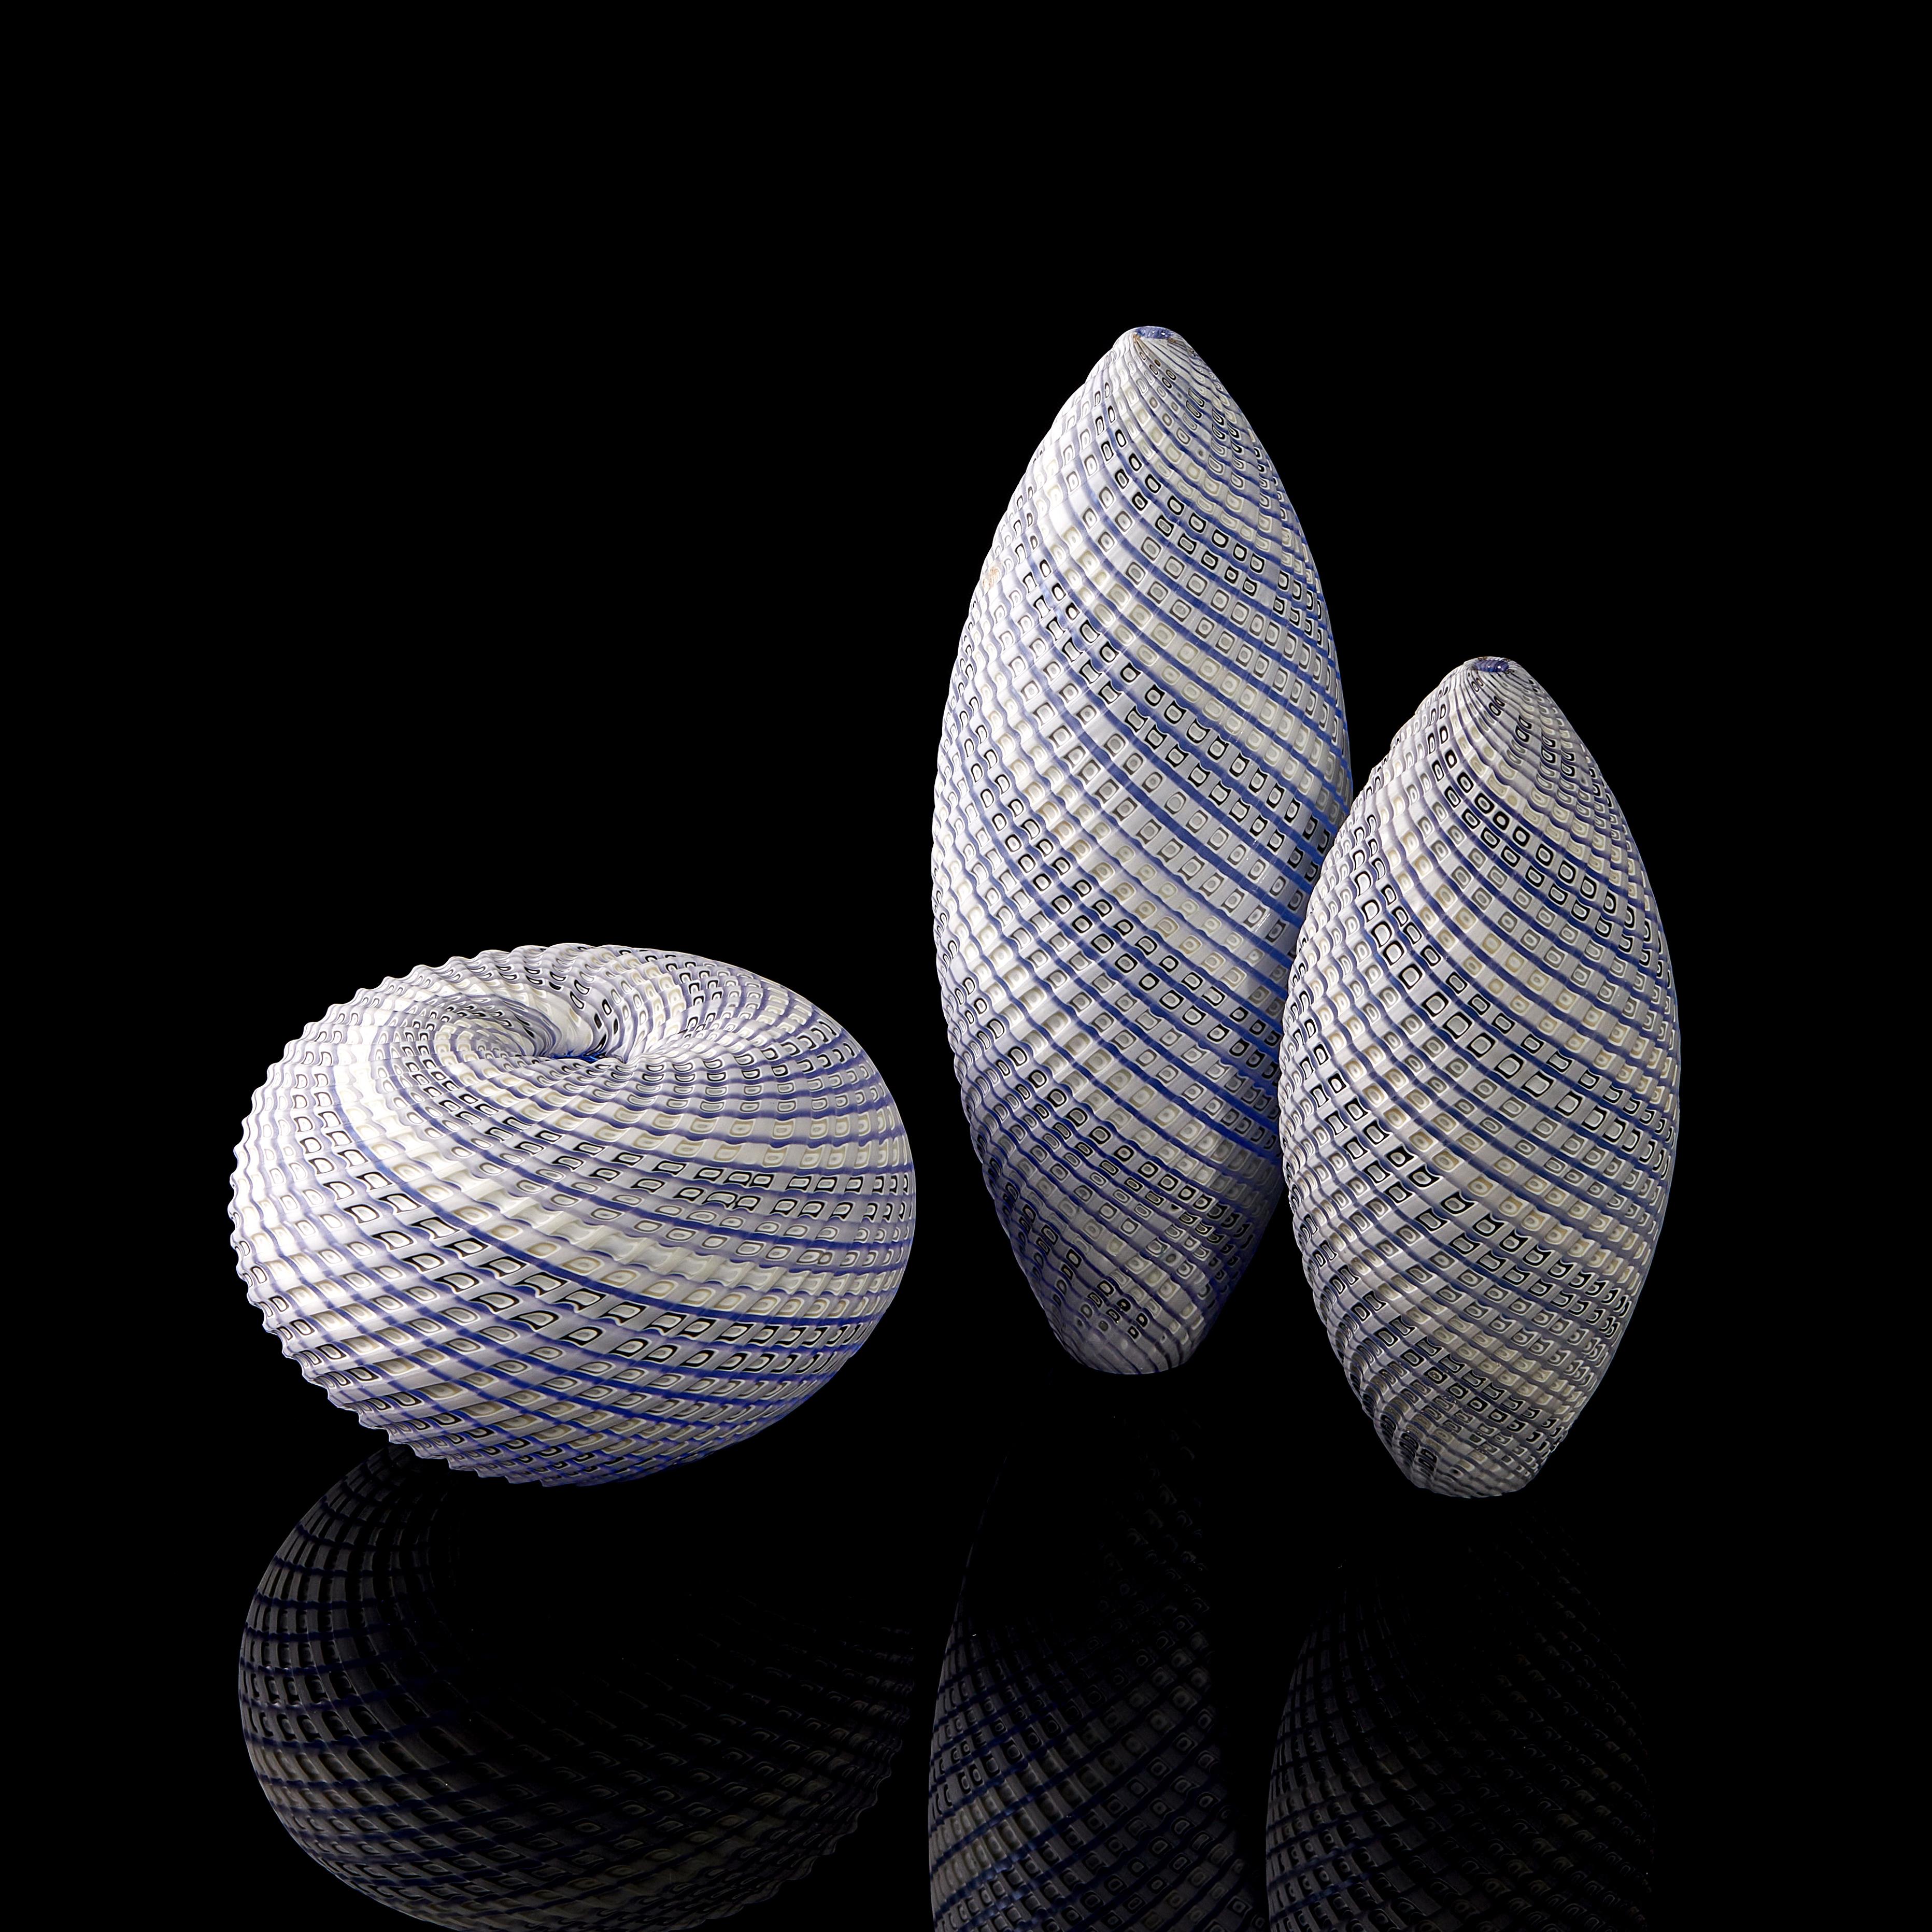 Woven three tone blue trio is a unique soft blue, grey & white hand blown glass installation by the British artist Layne Rowe. Each artwork within the trio has been hand blown using pre-made glass canes, formed from layers of colour by the artist,